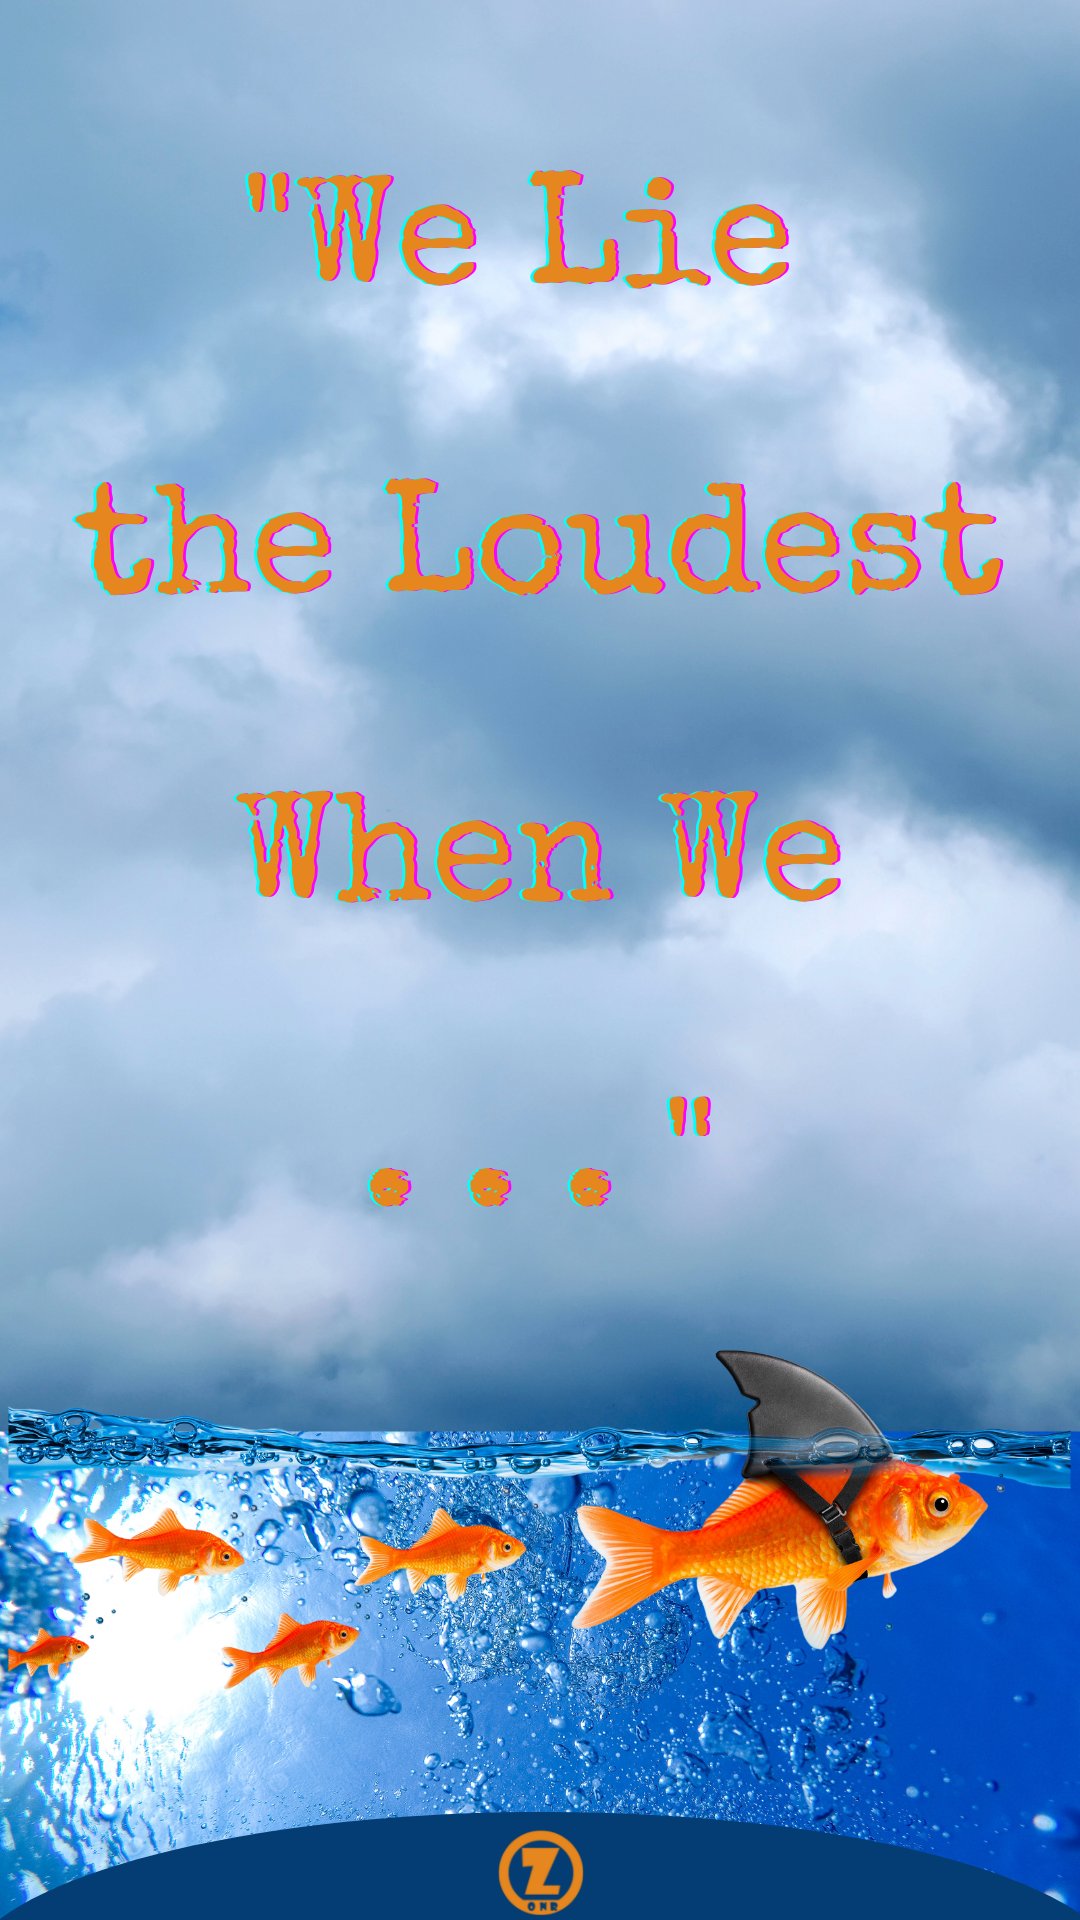 You are currently viewing What a Sad, yet Momentous Day when We Discover “We Lie the Loudest When We … ” – Step 4